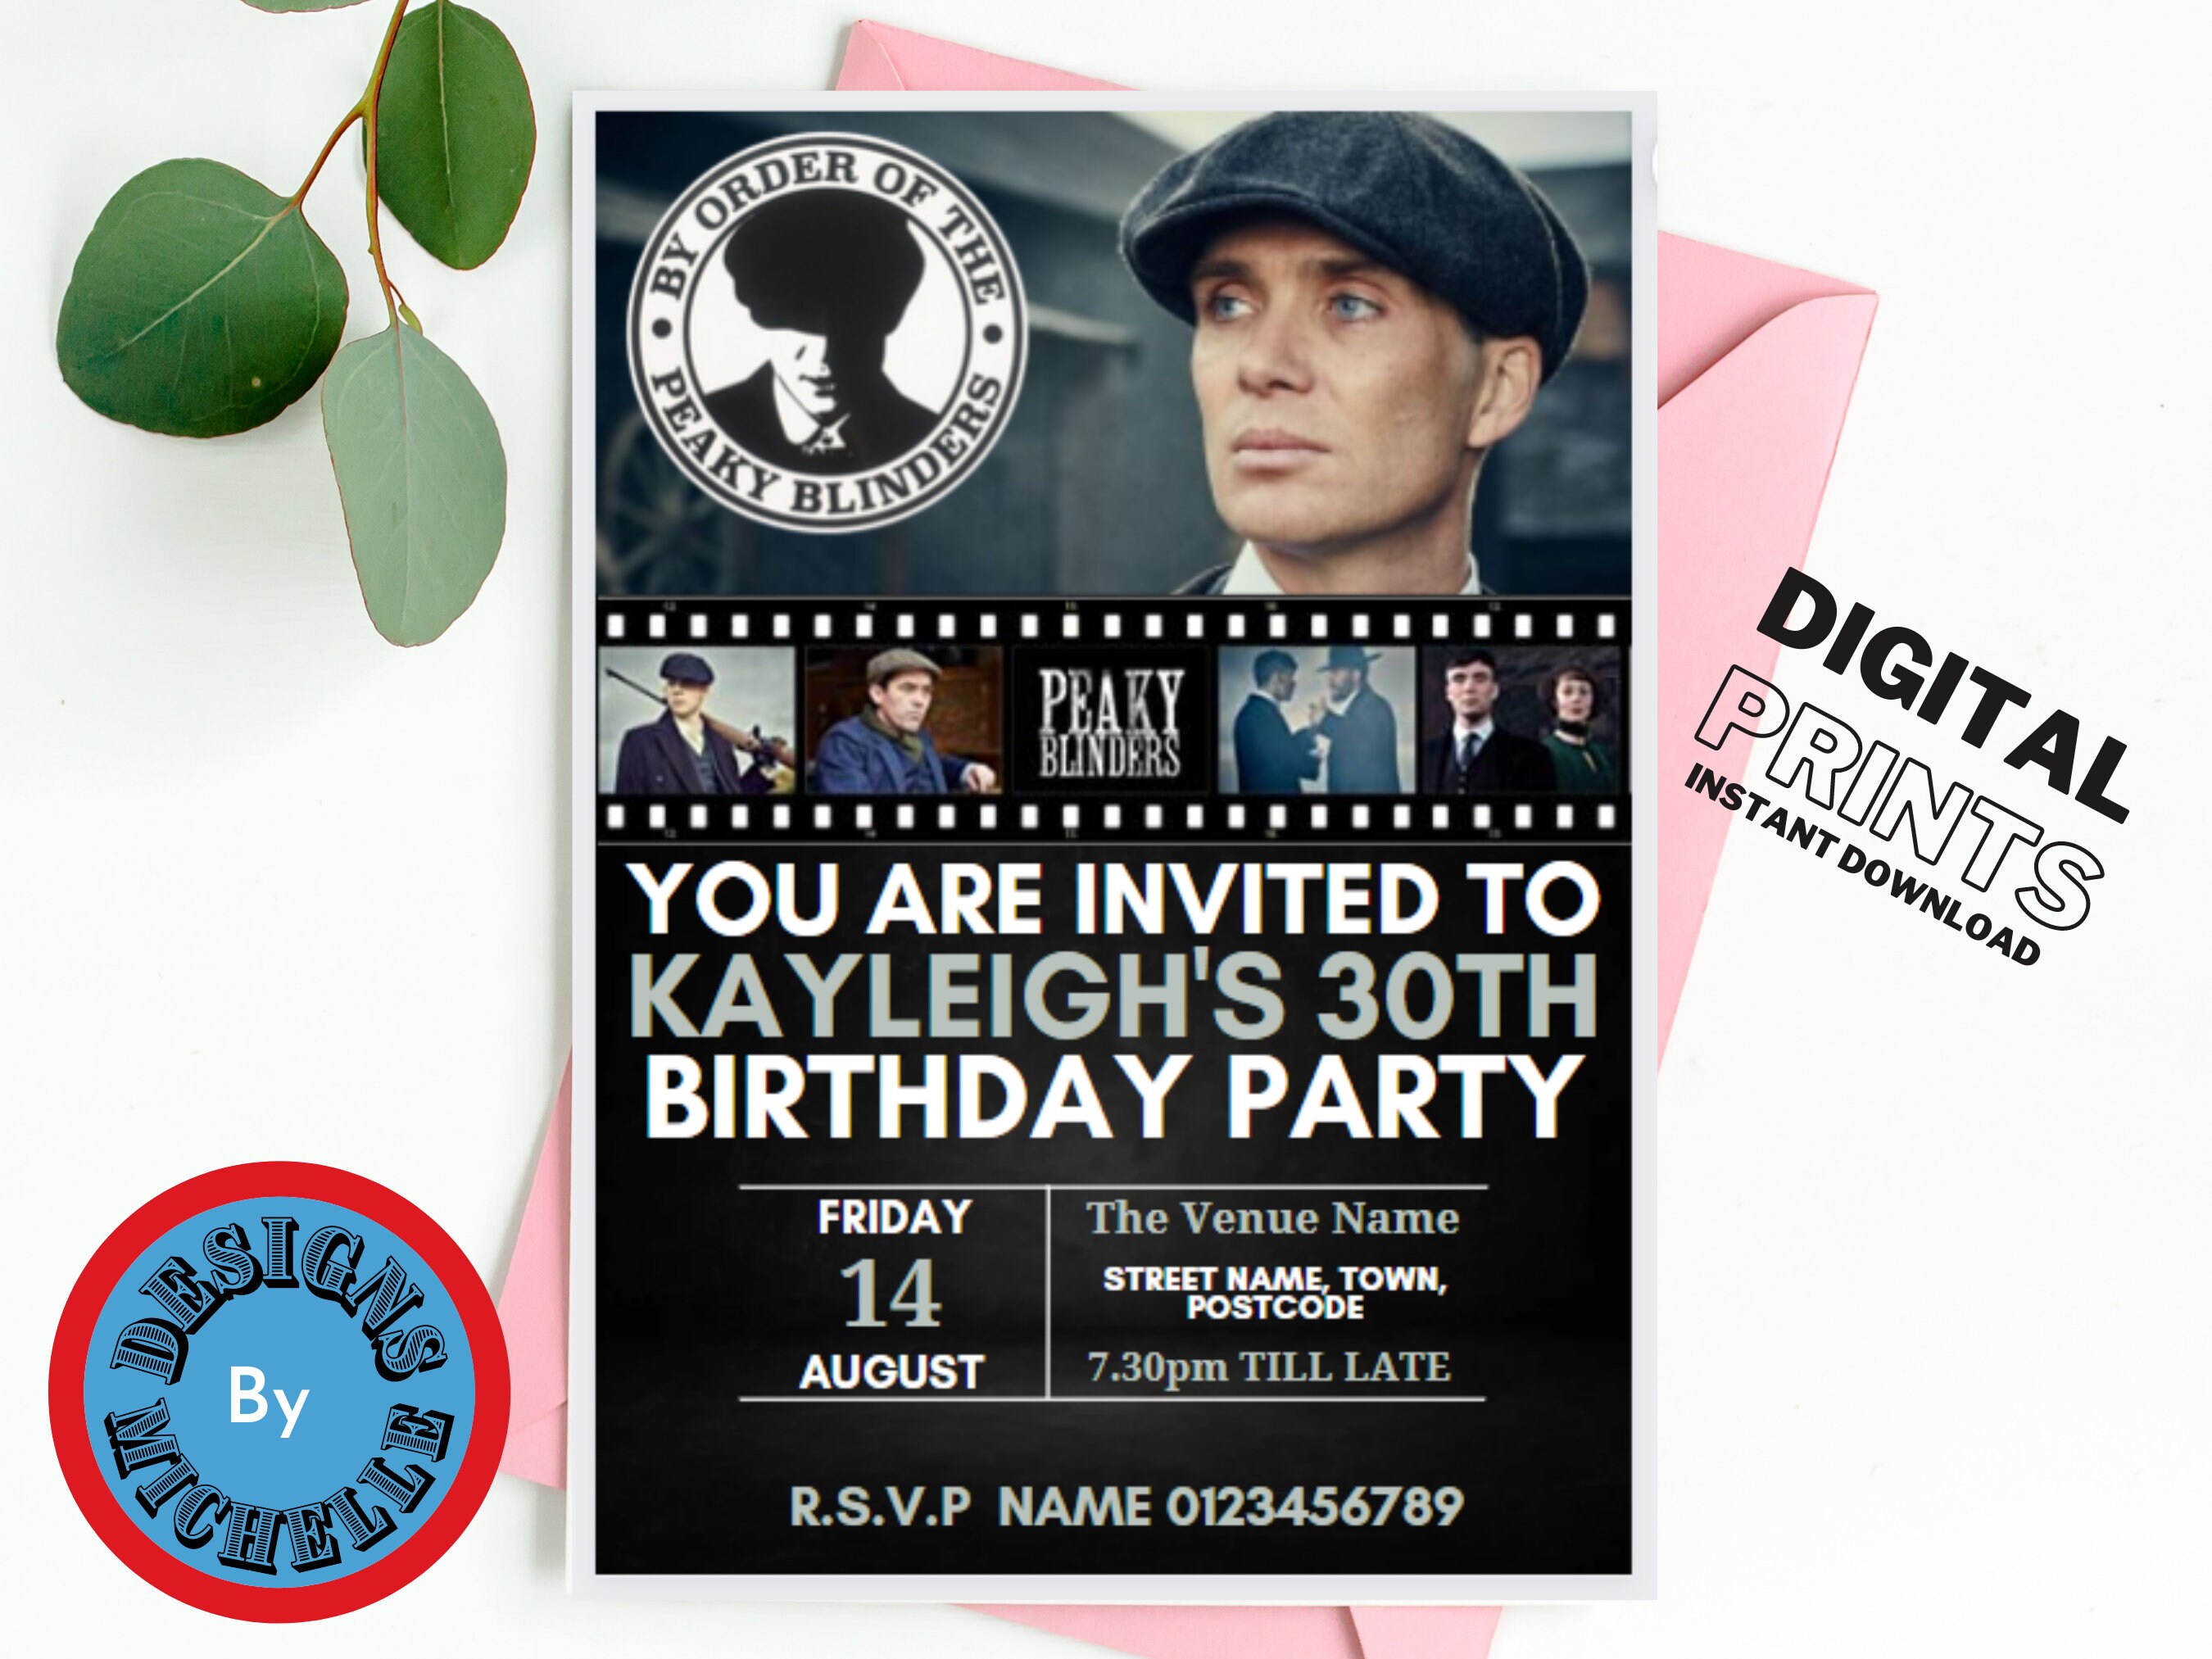 Peaky Blinders Inspired Birthday/ Event/ Party - Personalised invitations -  Themed Party - Digital Prints - pdf